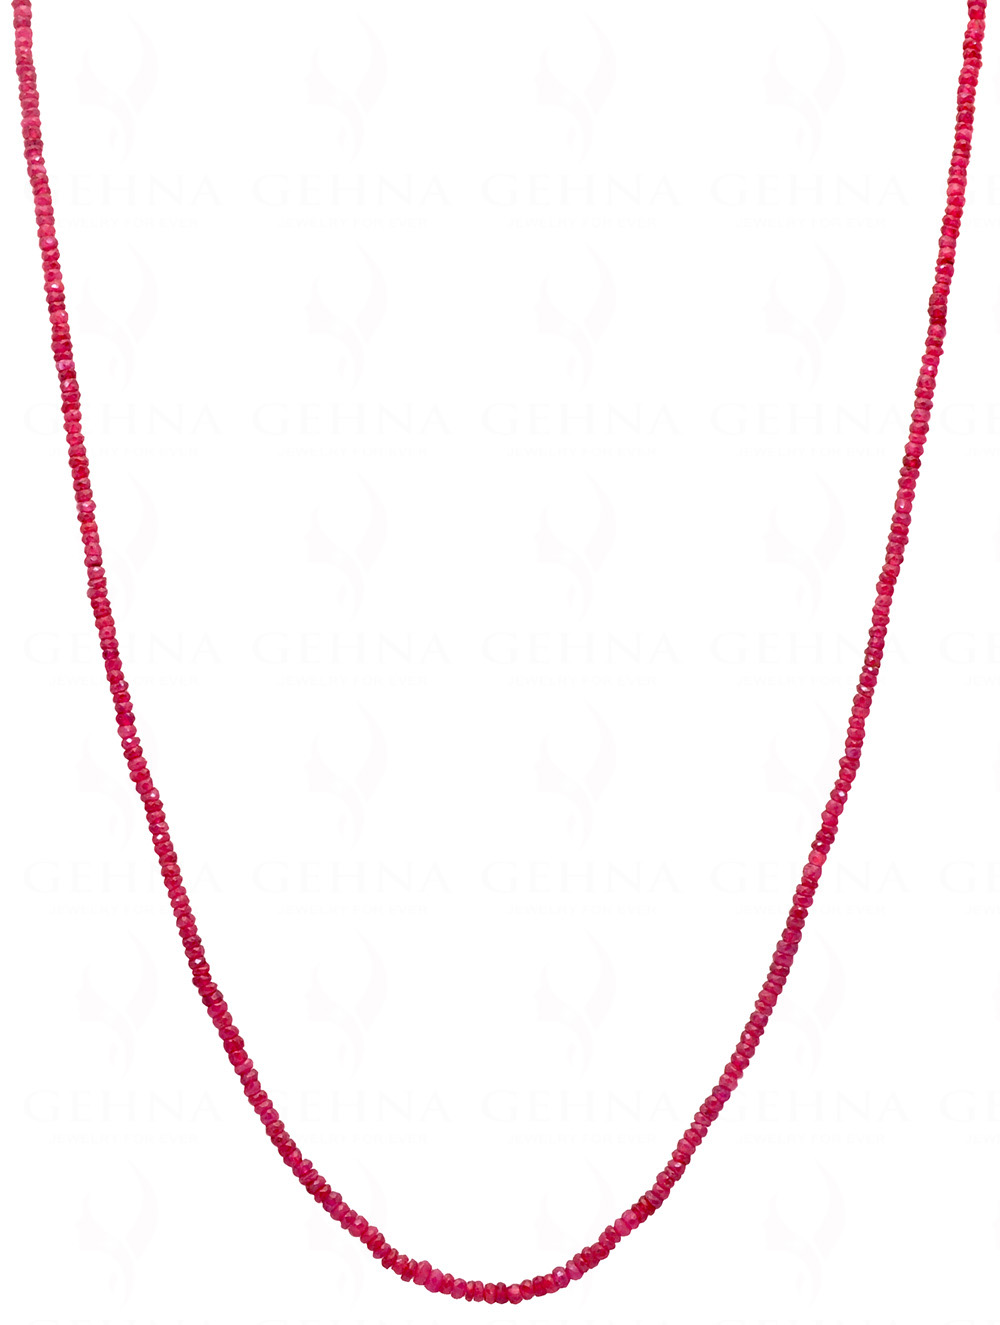 22" Inches Glass Filled Ruby Gemstone Faceted Bead String NP-1398